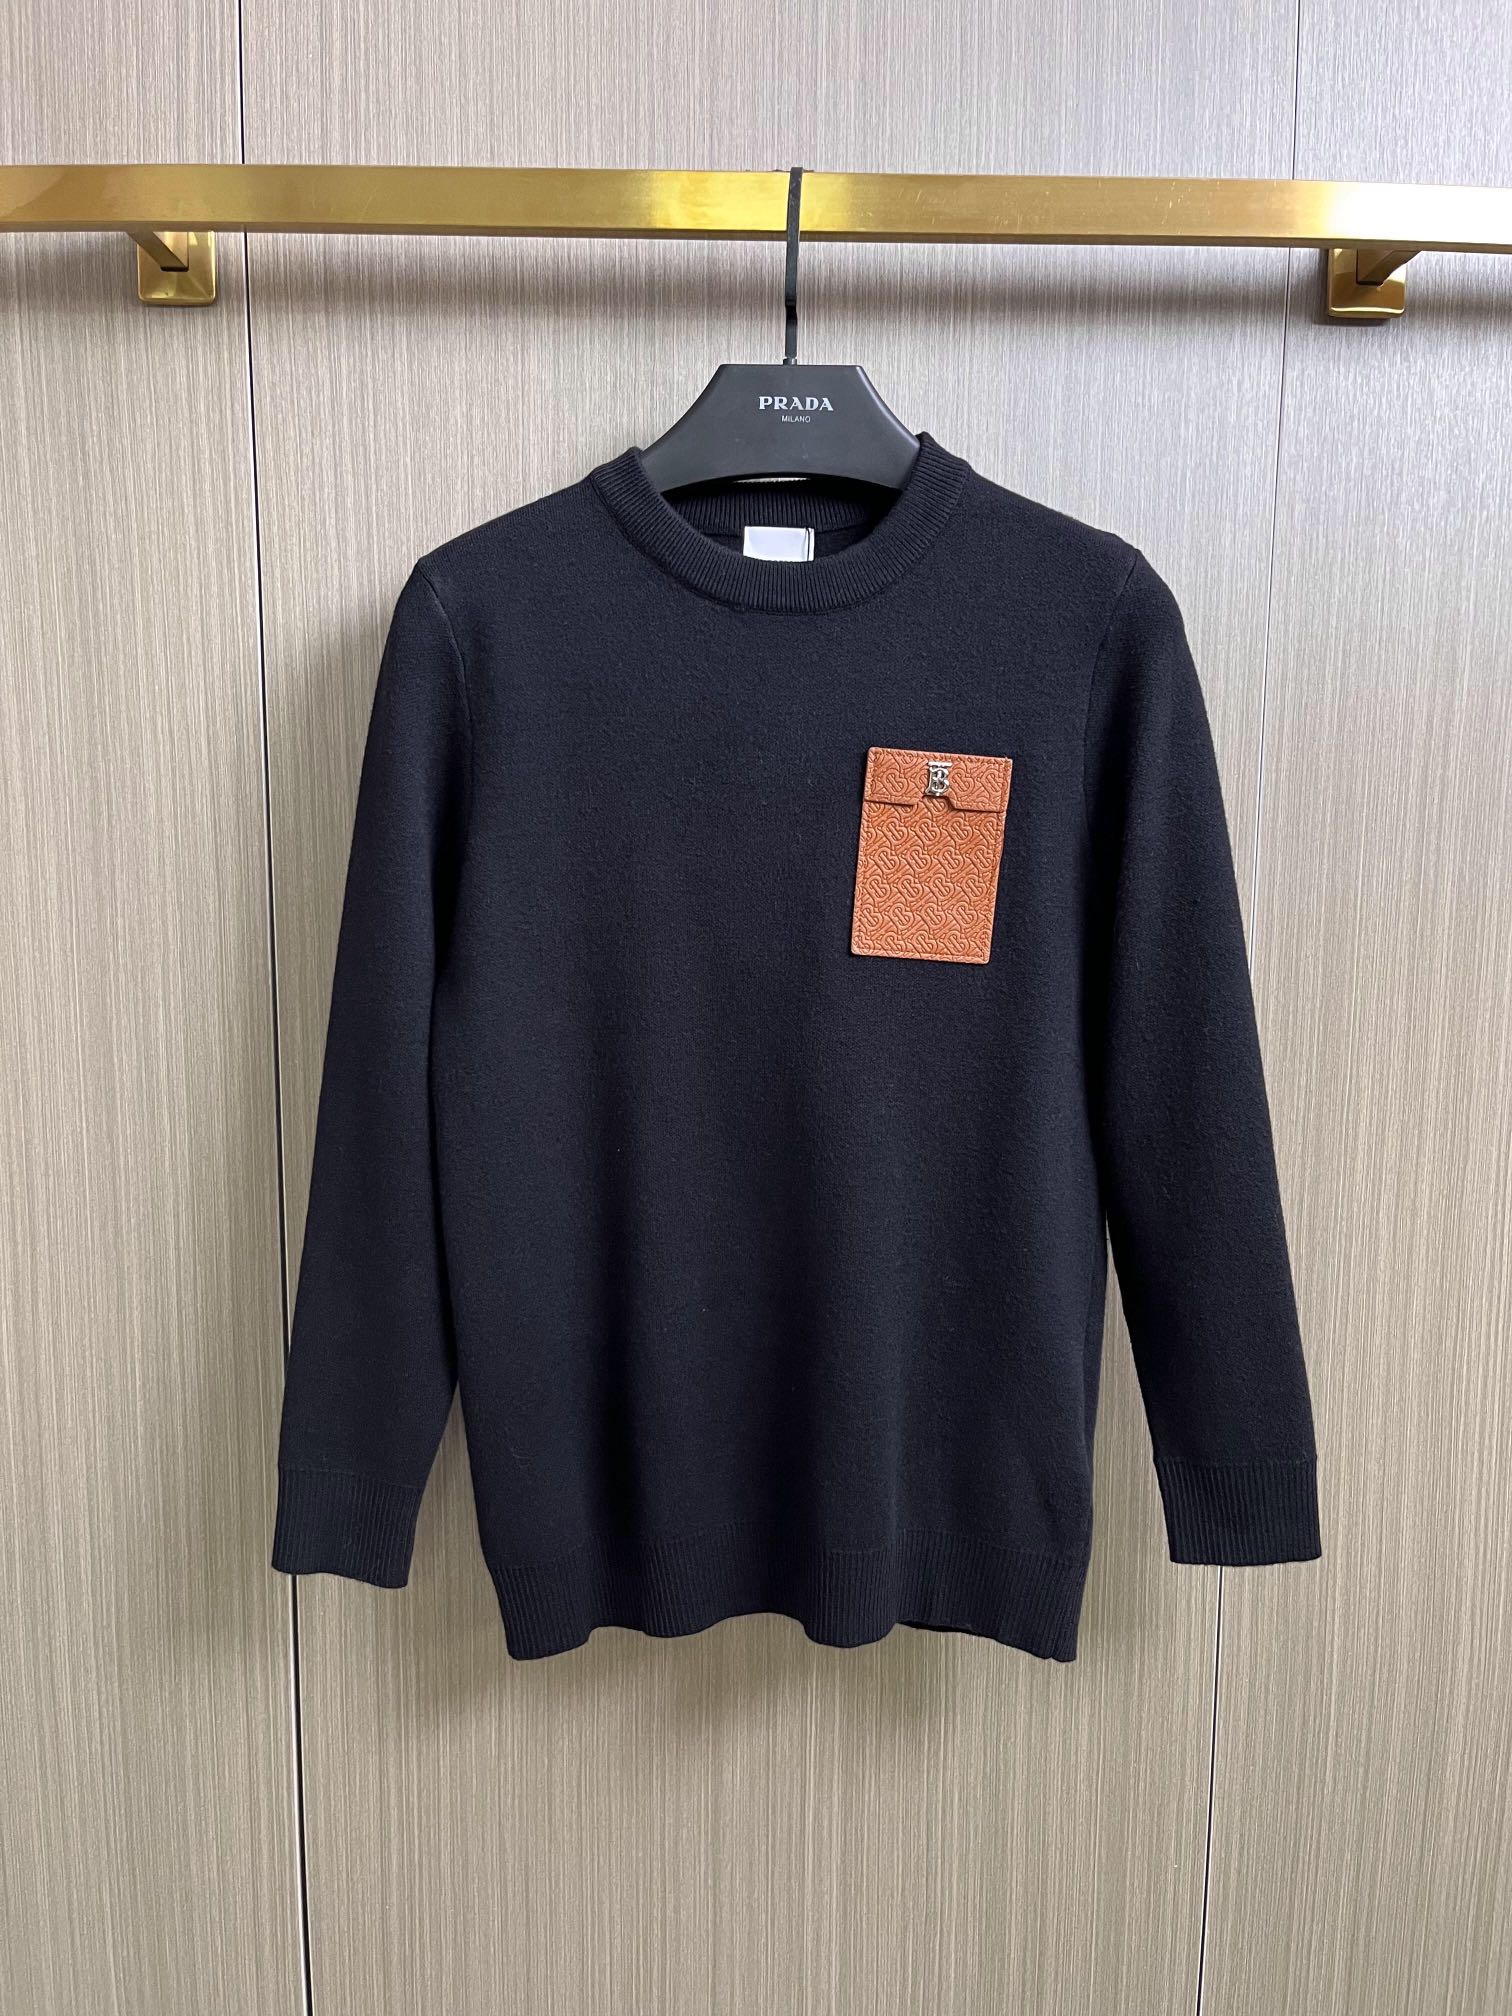 Burberry Online Clothing Sweatshirts Wholesale Replica Splicing Fall/Winter Collection Fashion Casual